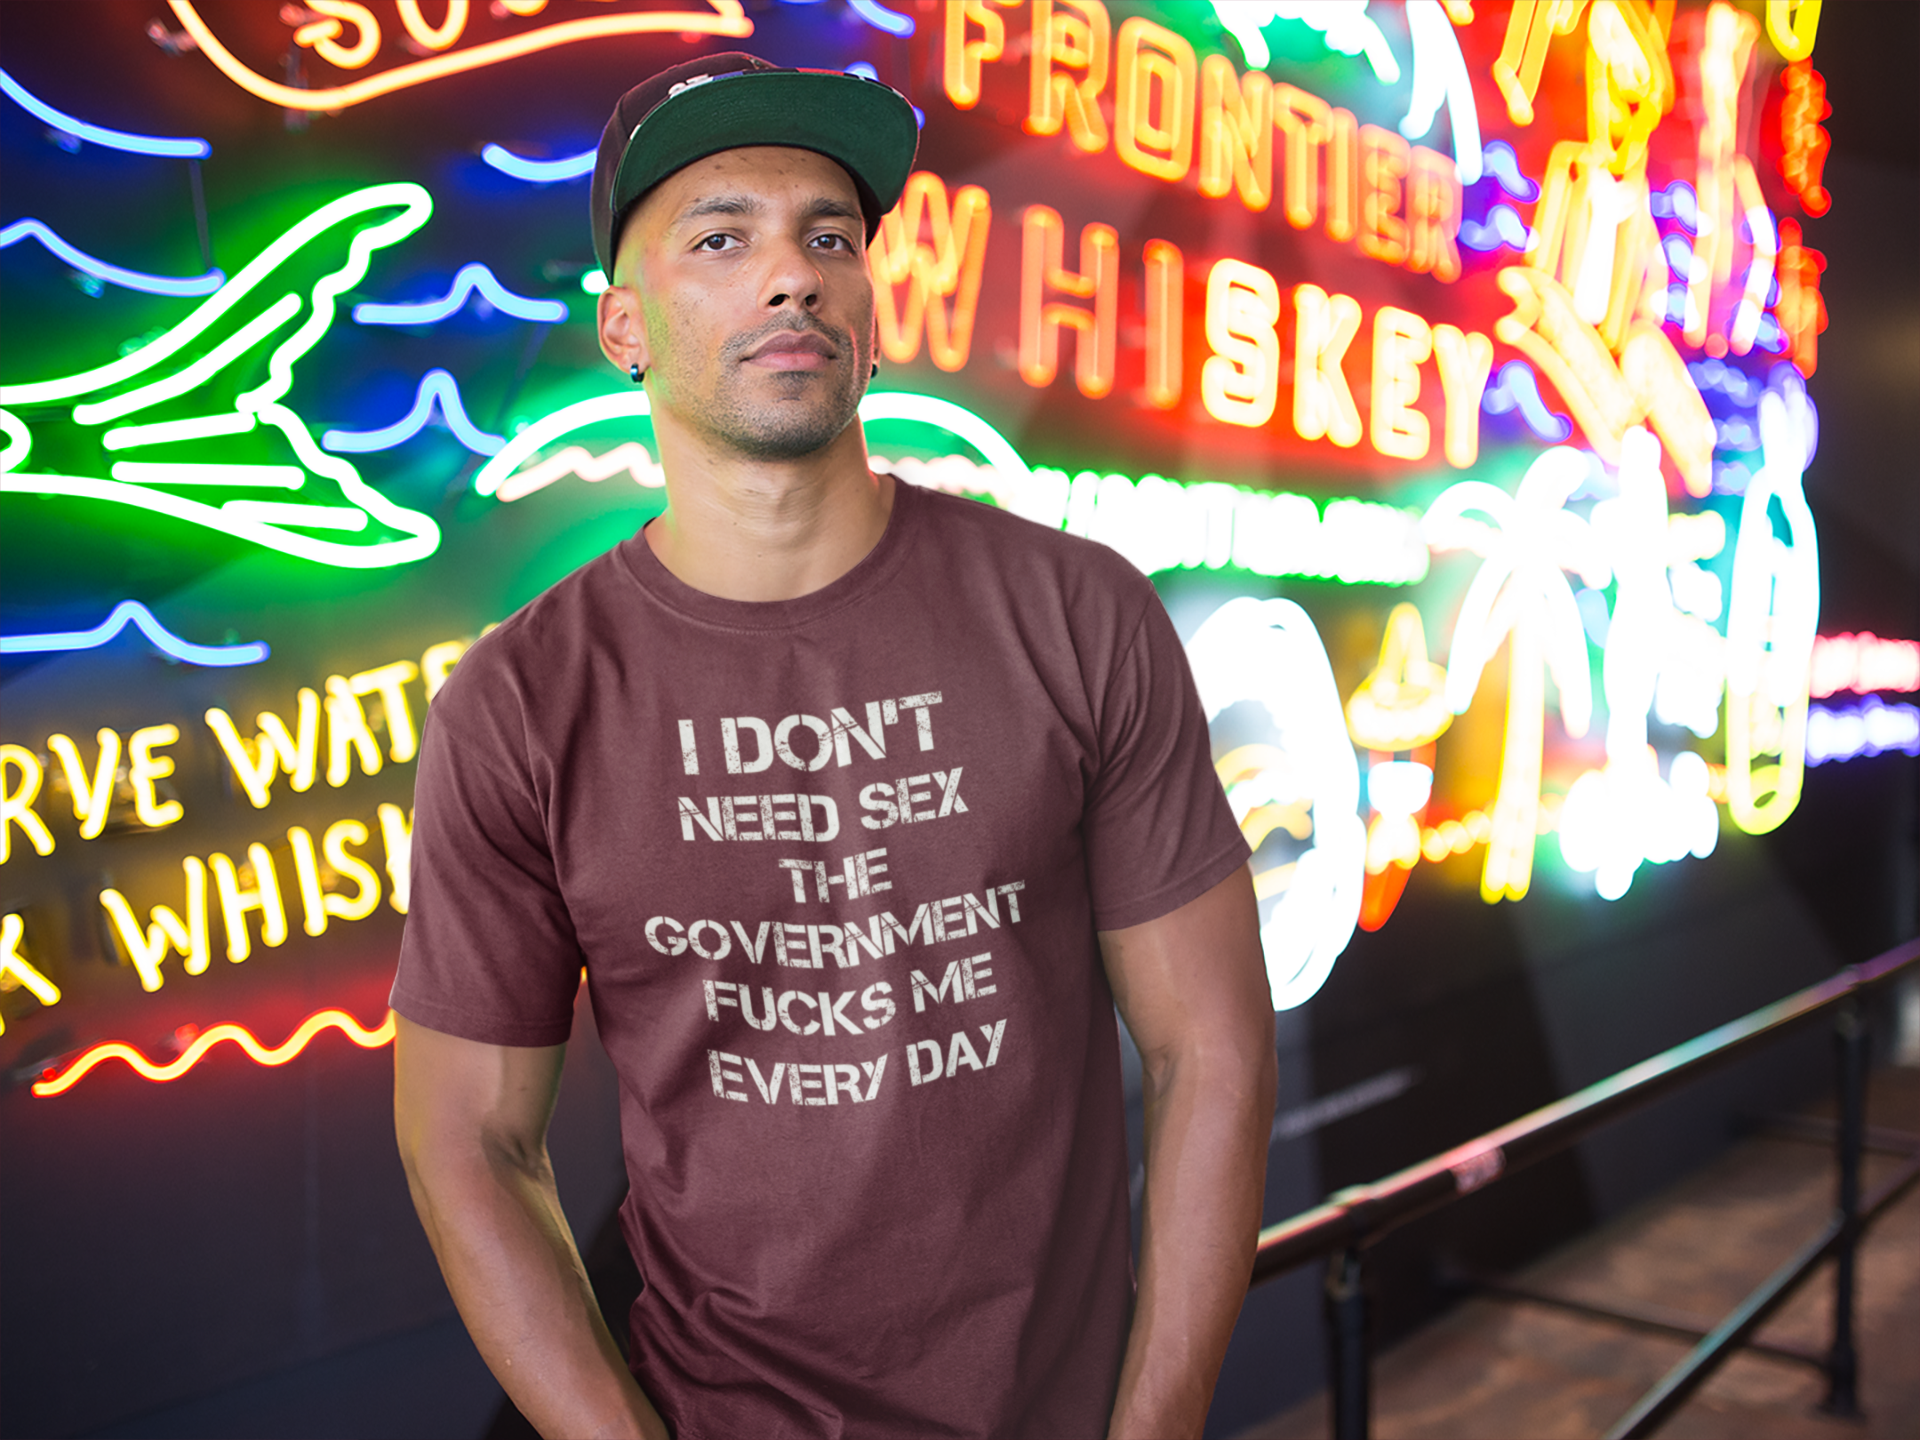 I Don't Need Sex The Government Fucks Me Everyday T-Shirt